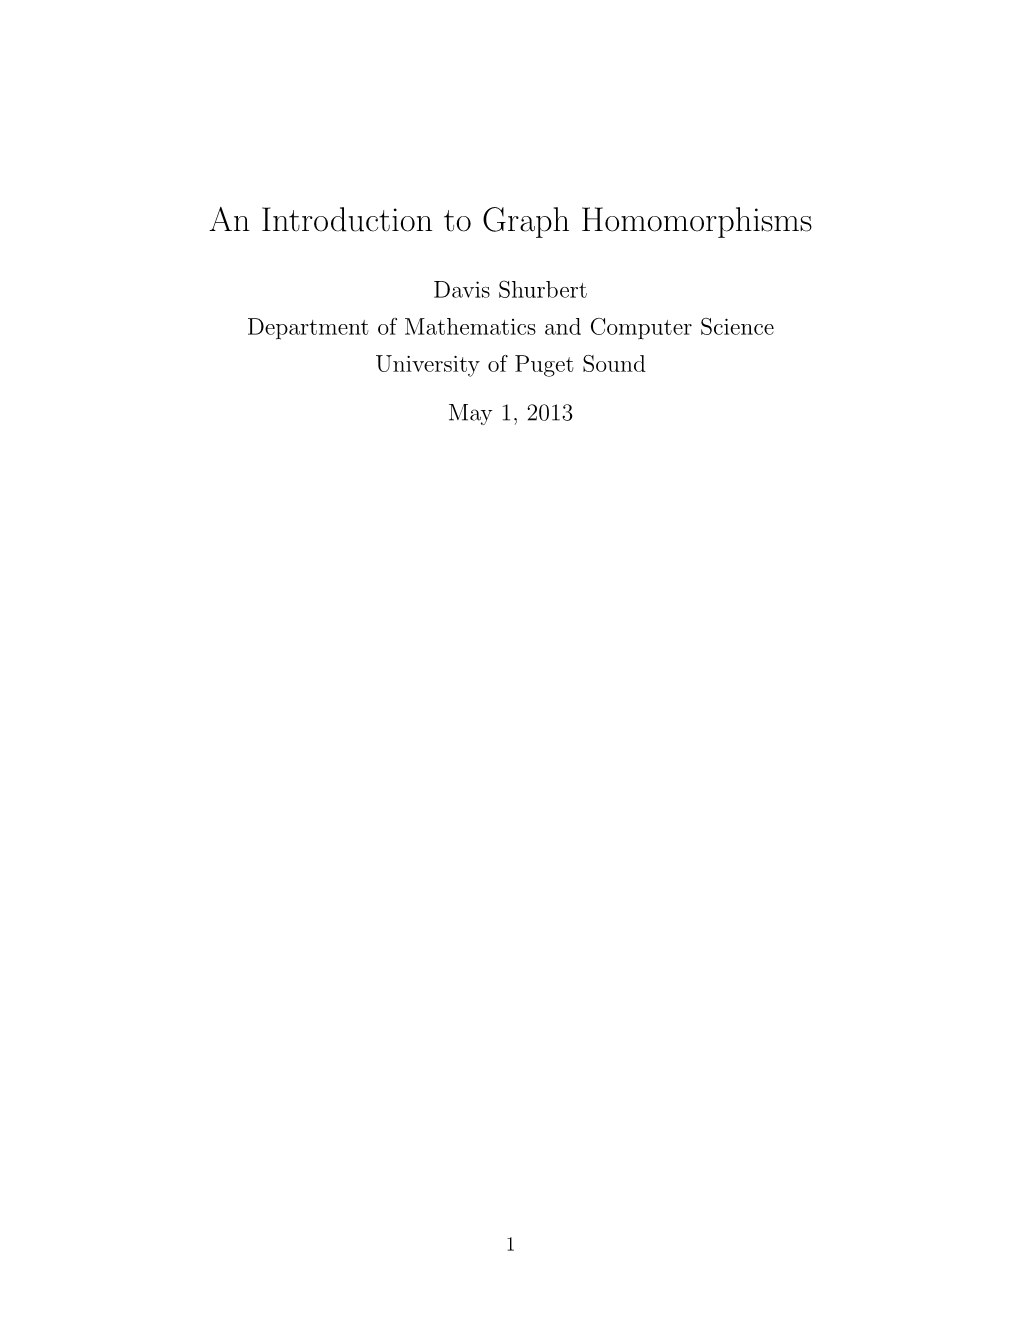 An Introduction to Graph Homomorphisms